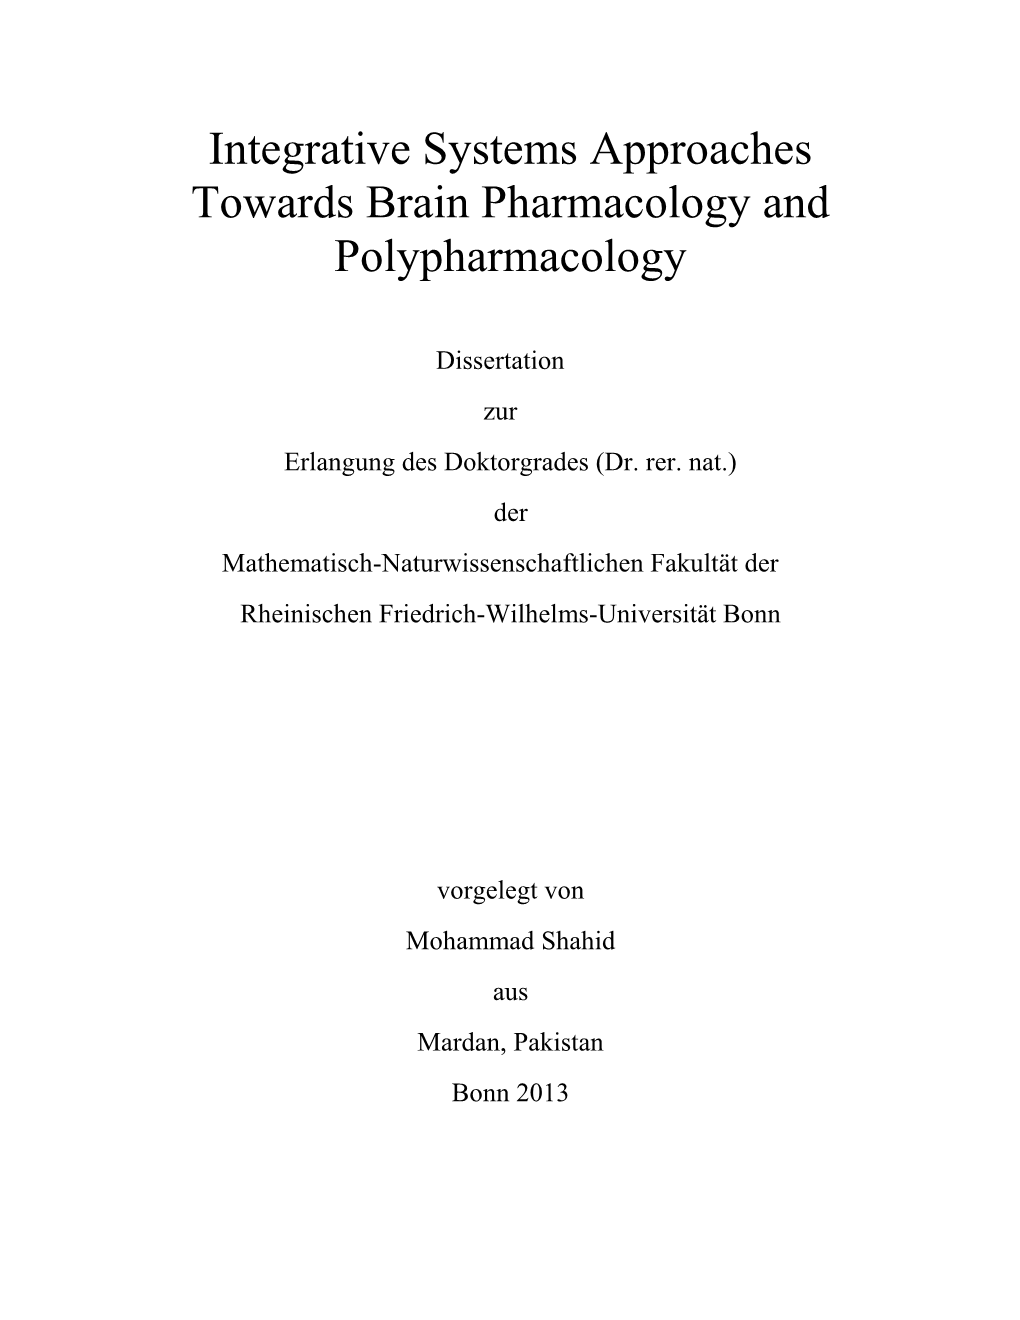 Integrative Systems Approaches Towards Brain Pharmacology and Polypharmacology